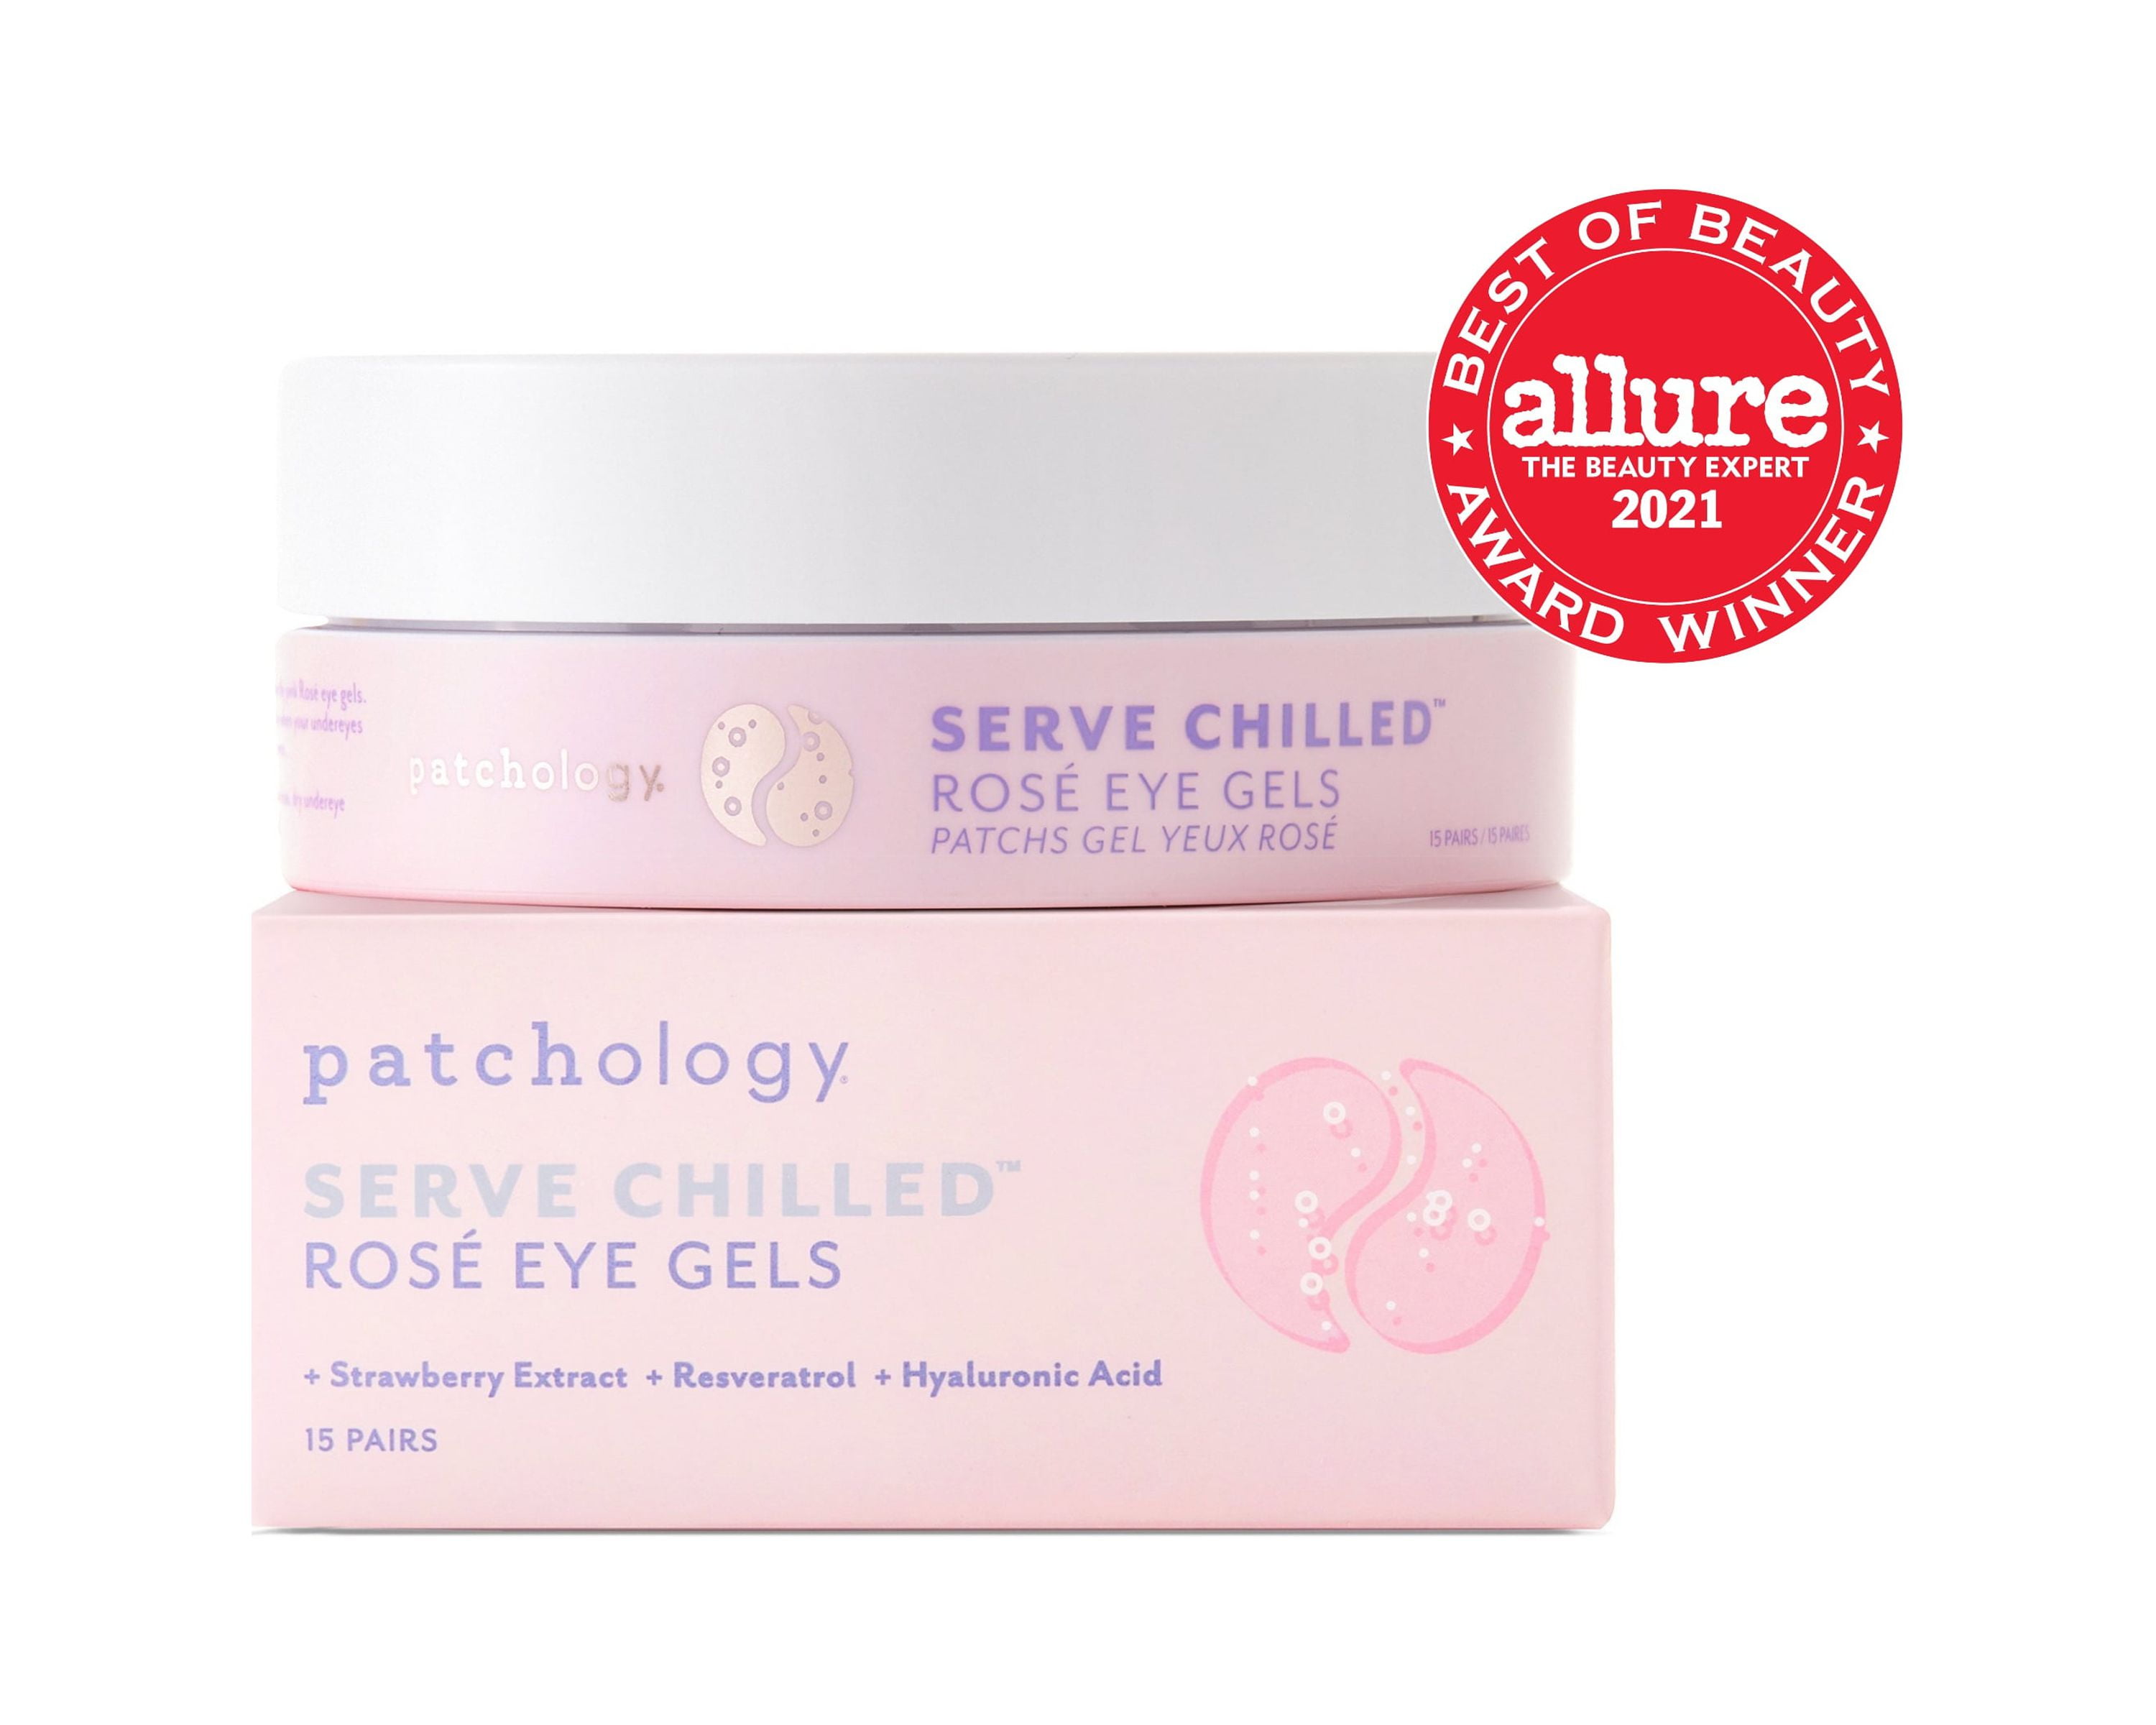 Patchology Eye Gels - Chilled Eye Patches for Puffy Eyes, Dark